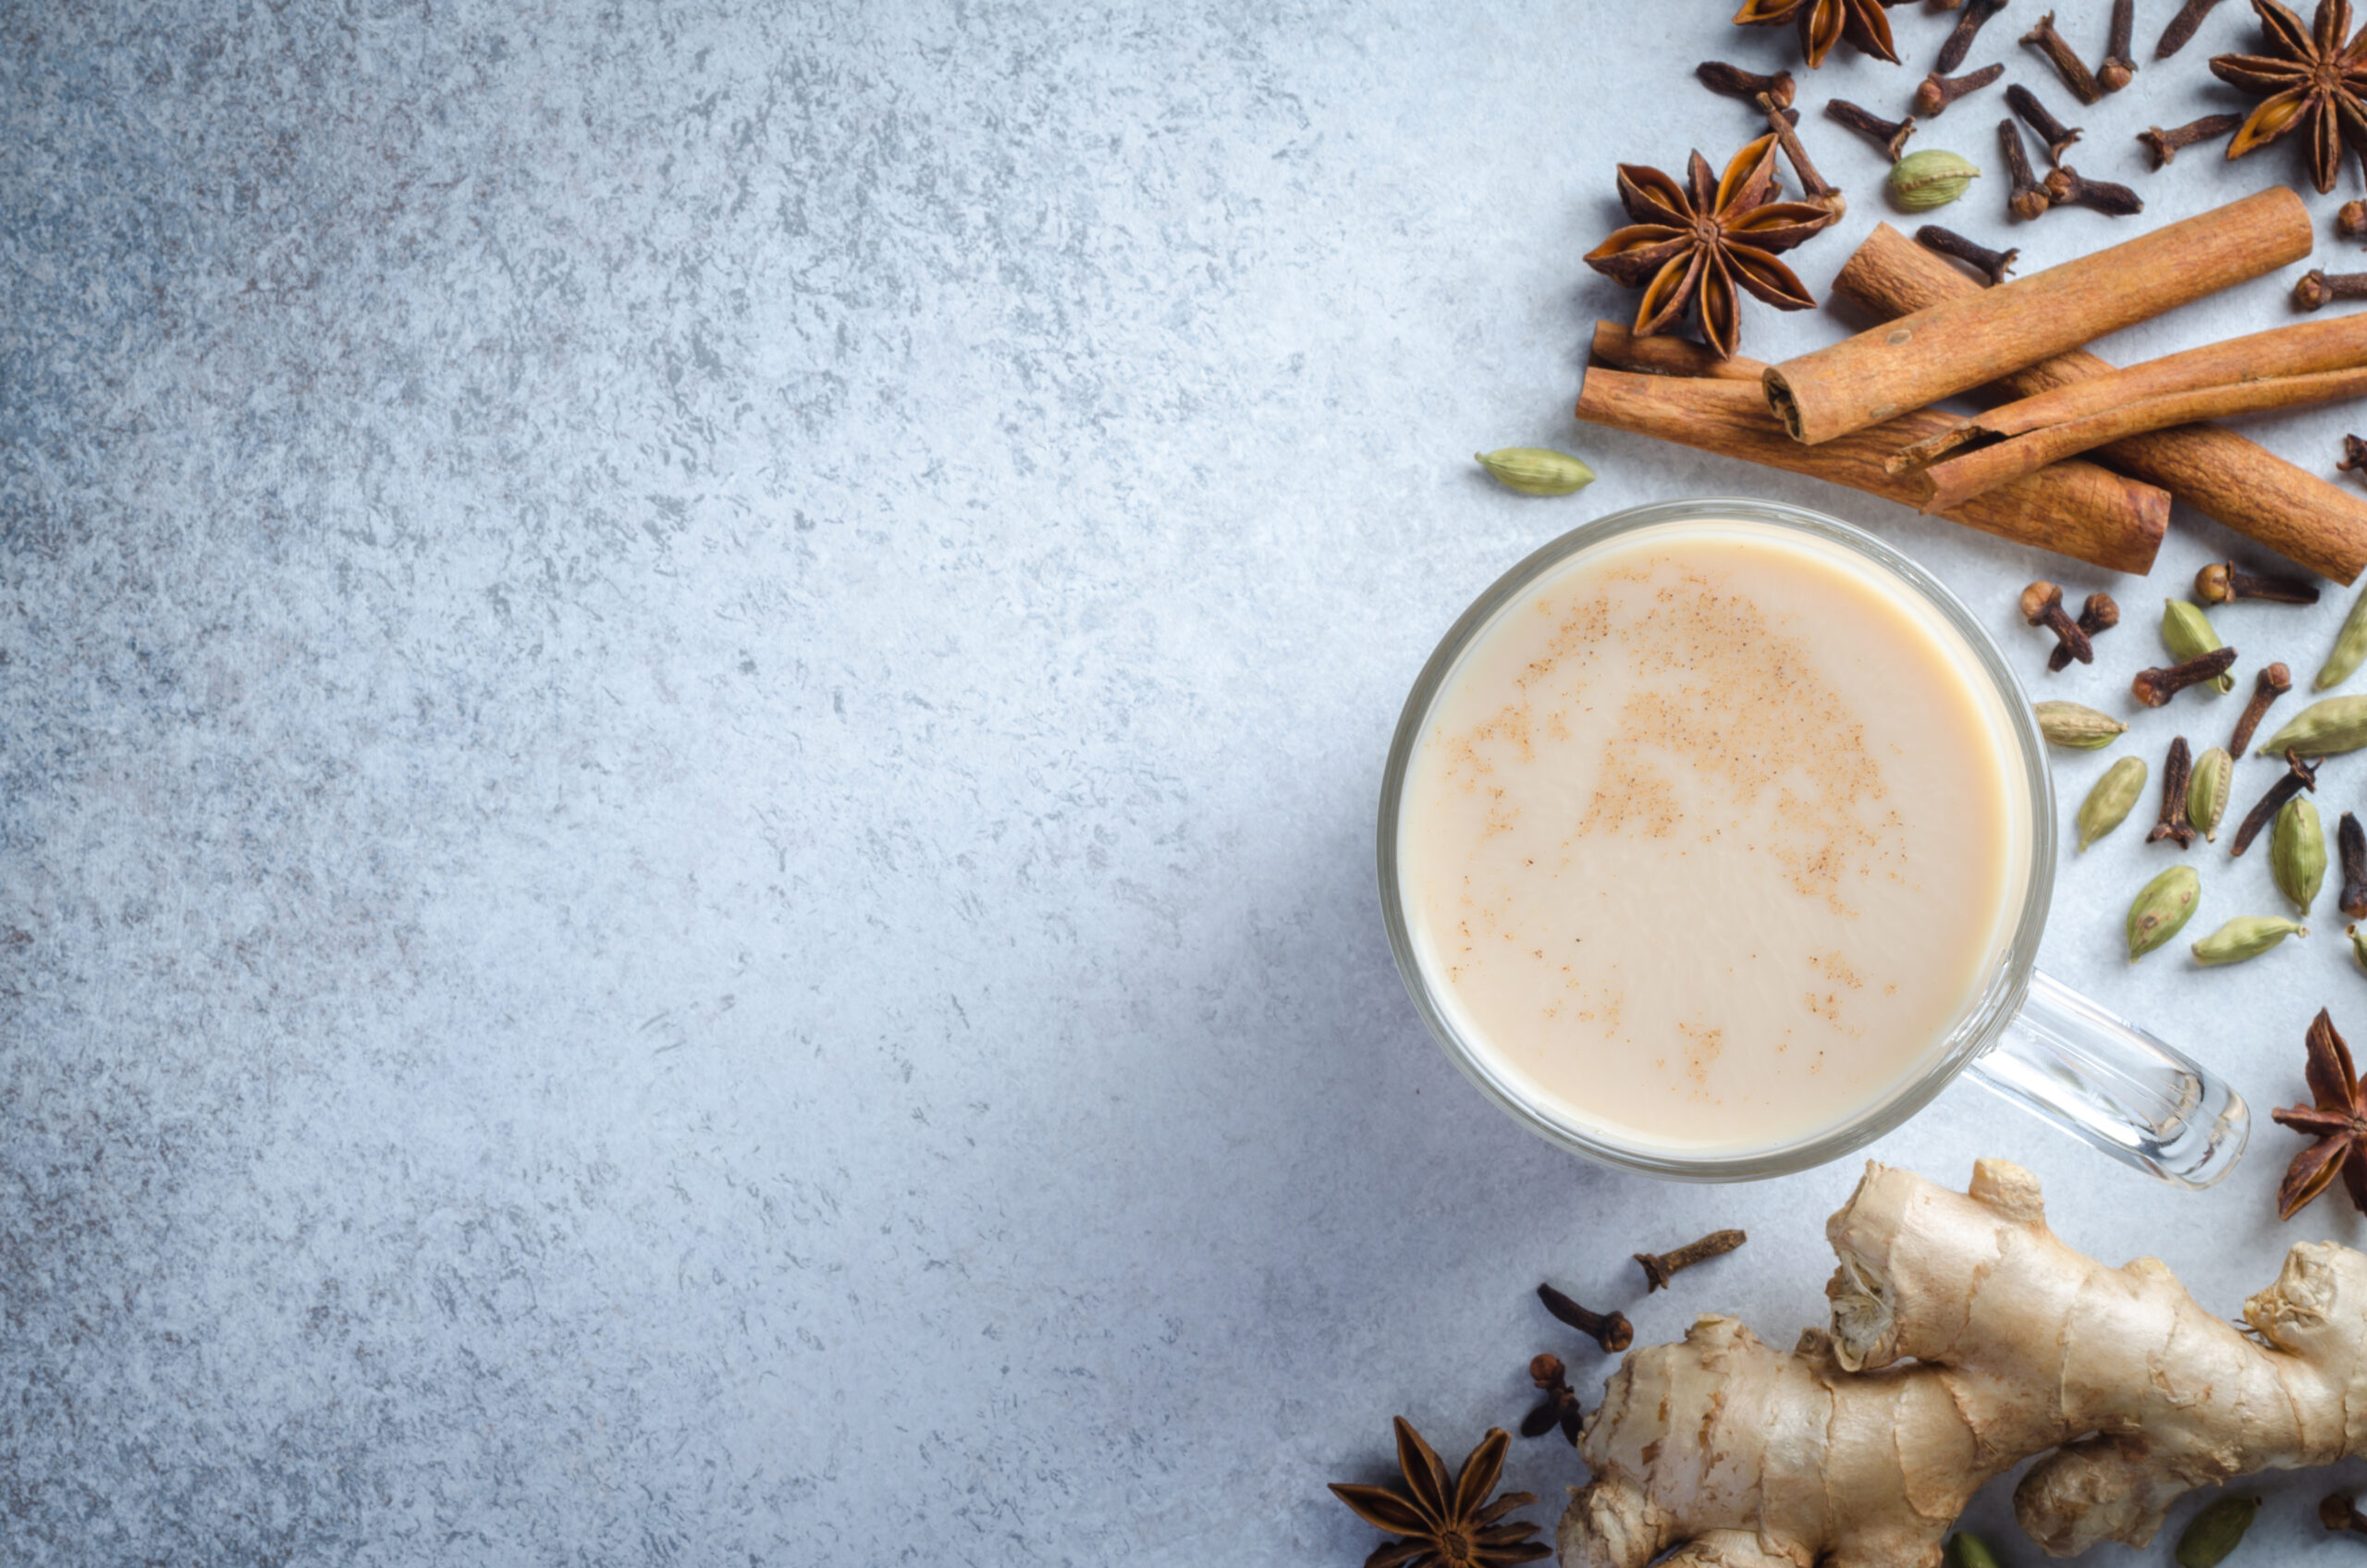 LUXURIOUS CHAI TEA WITH ADDED COLLAGEN PEPTIDES! A WAY TO START A DAY